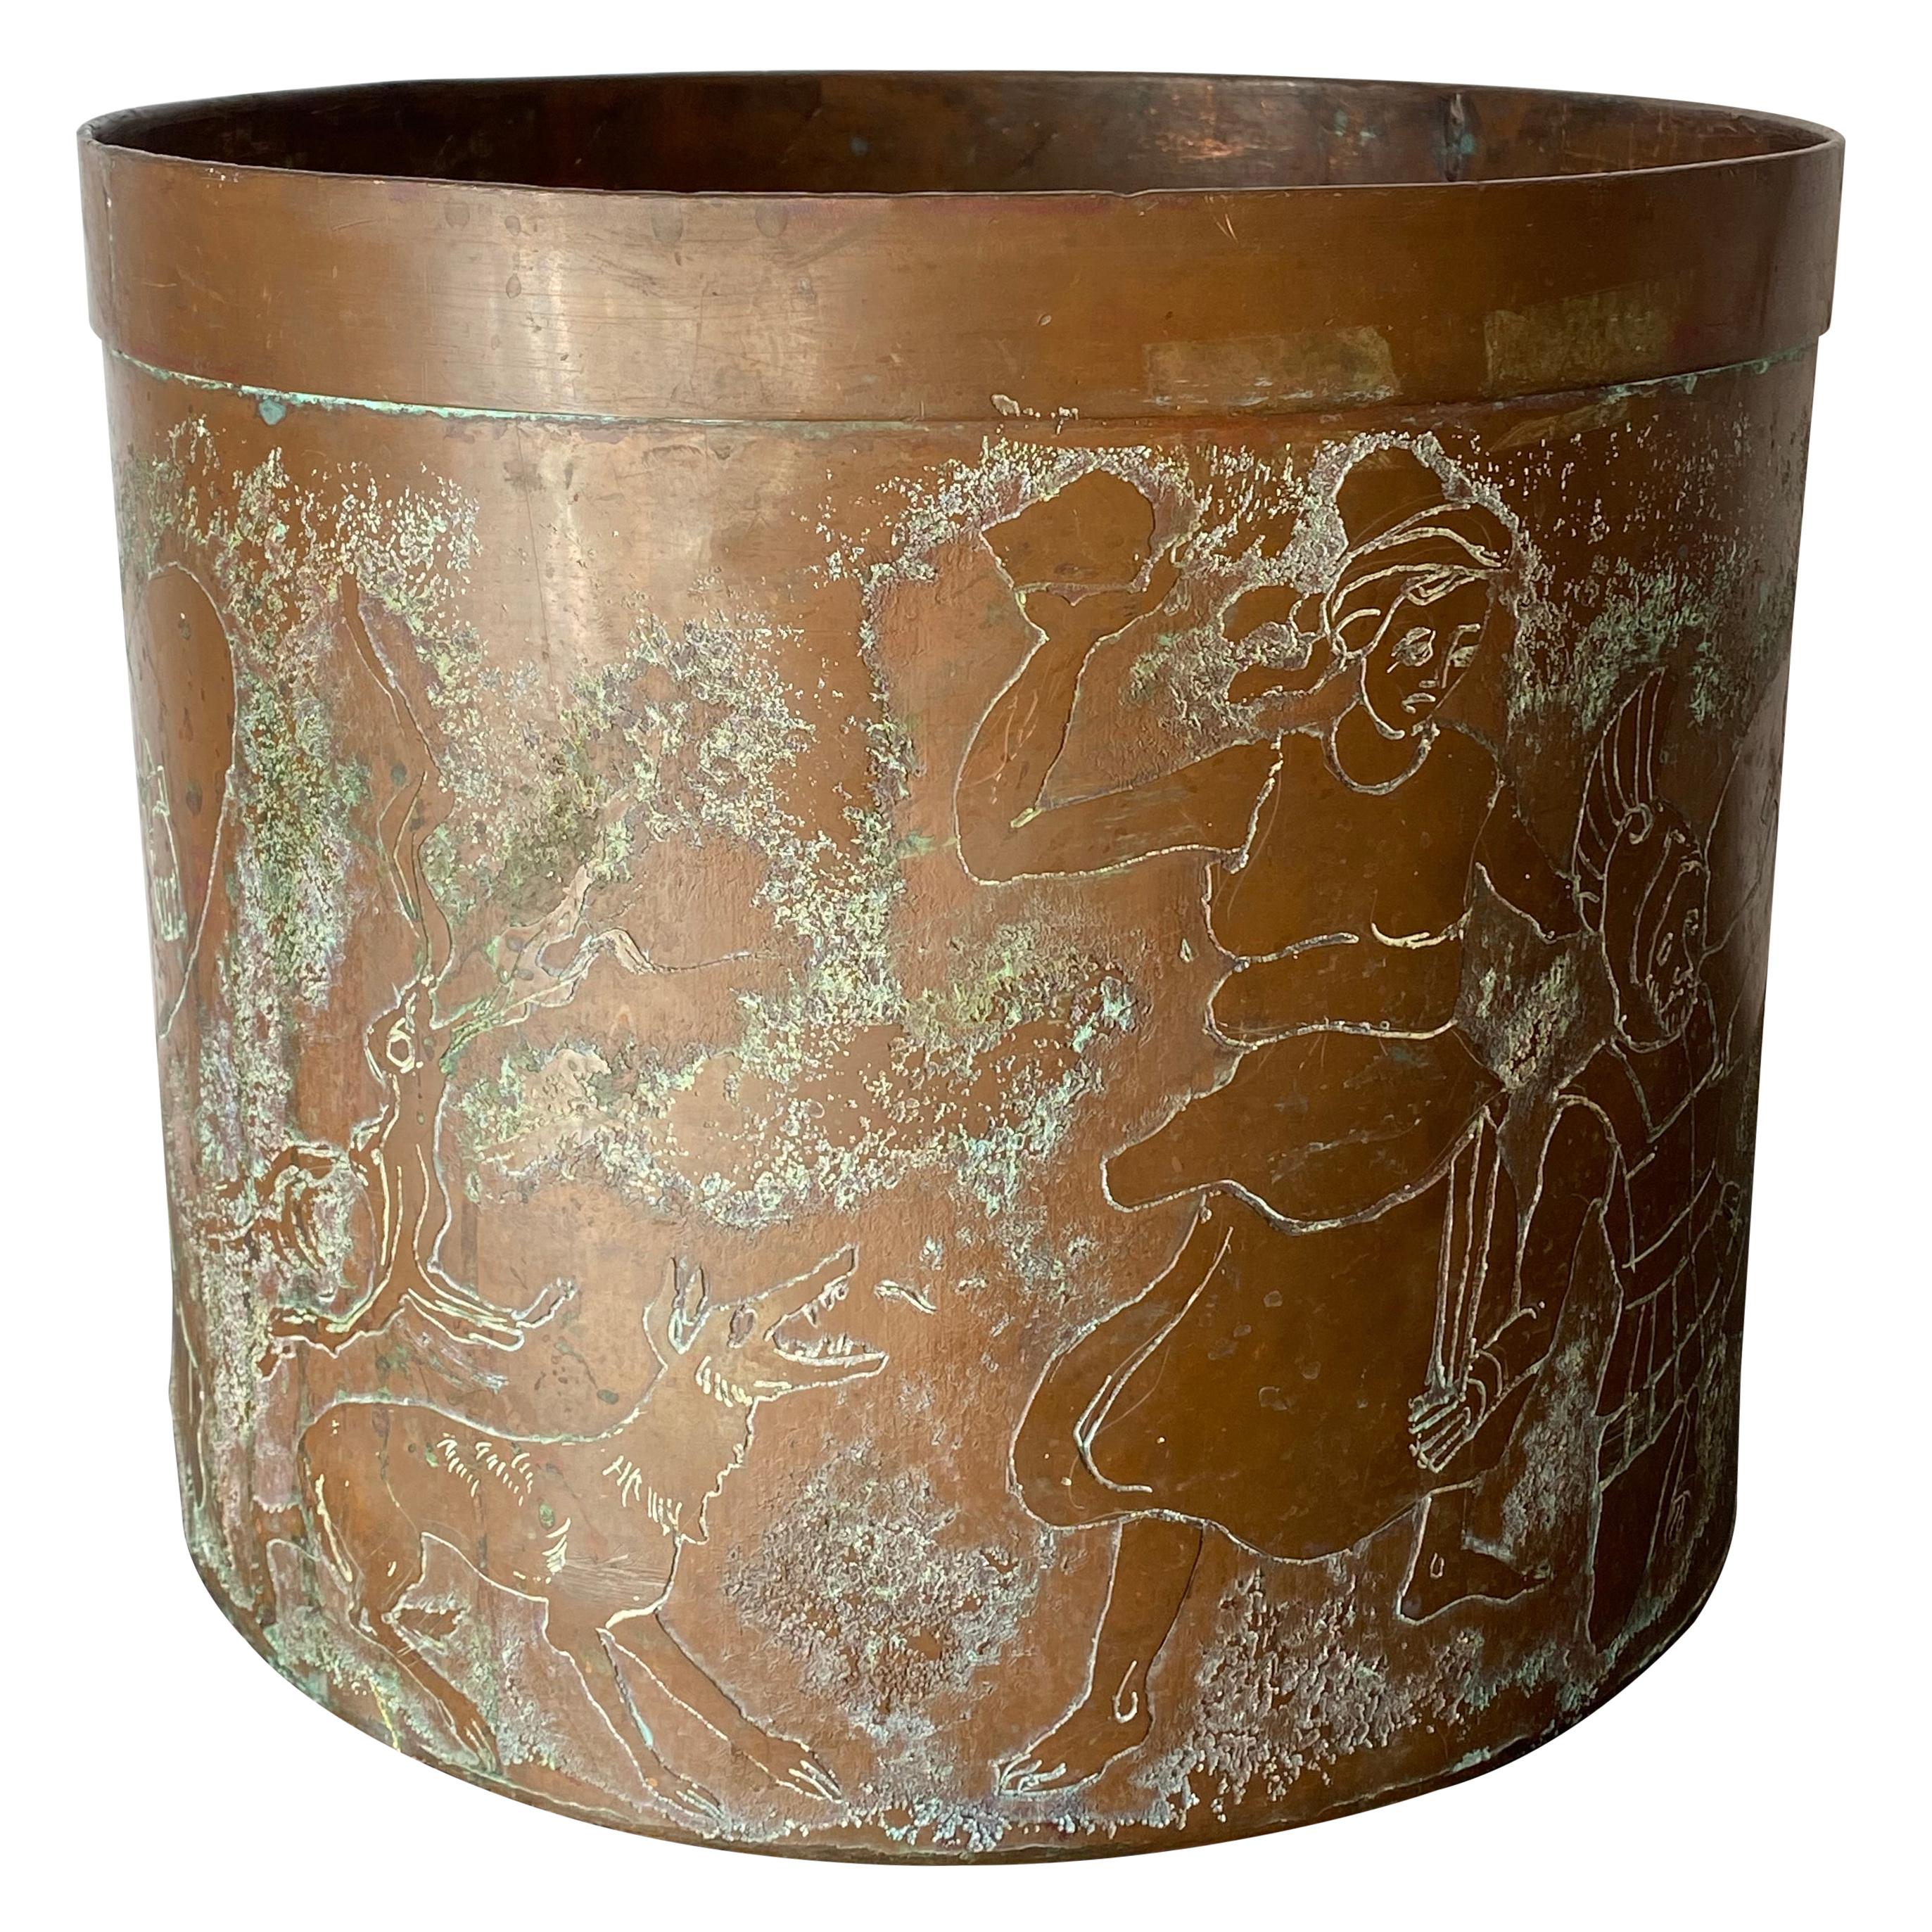 Etched Copper Planter Style of LaVerne